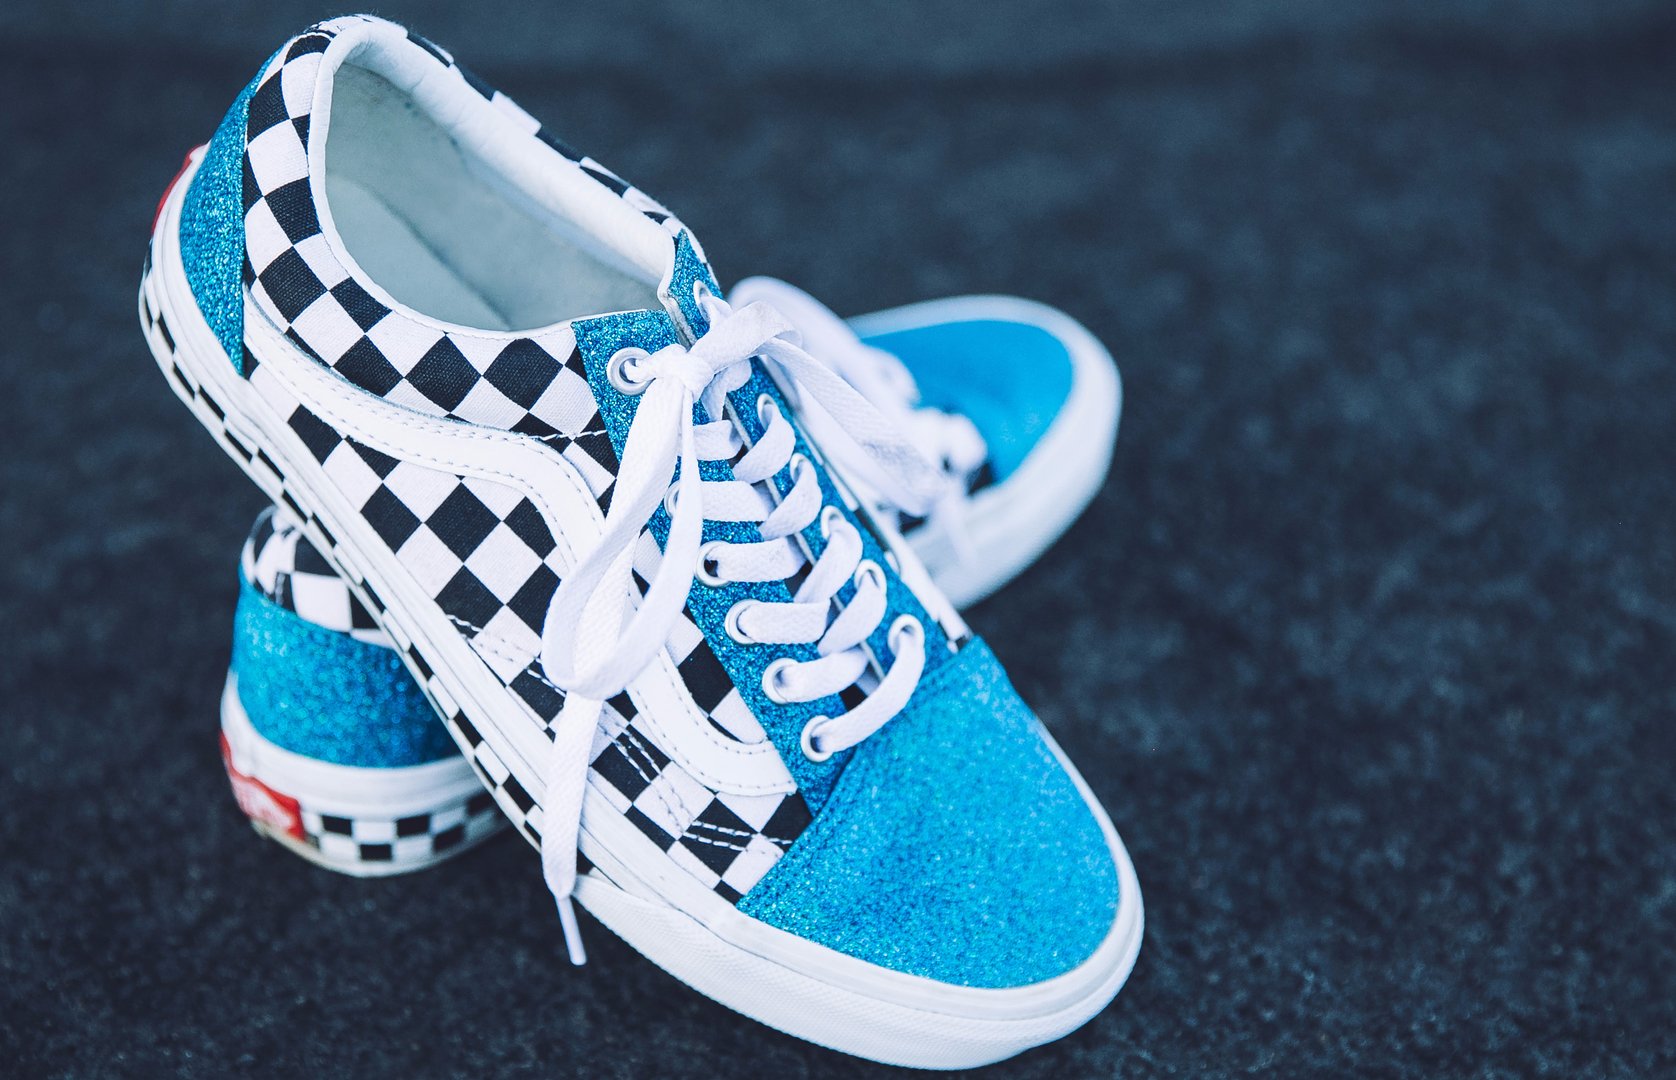 øjenbryn Slibende Lydig Vans on Twitter: "Mix and match your favorite colors and prints in the  Customs Shop. Create your own pair now at https://t.co/f5ezIotTWR  https://t.co/mfiPcfGV3j" / Twitter